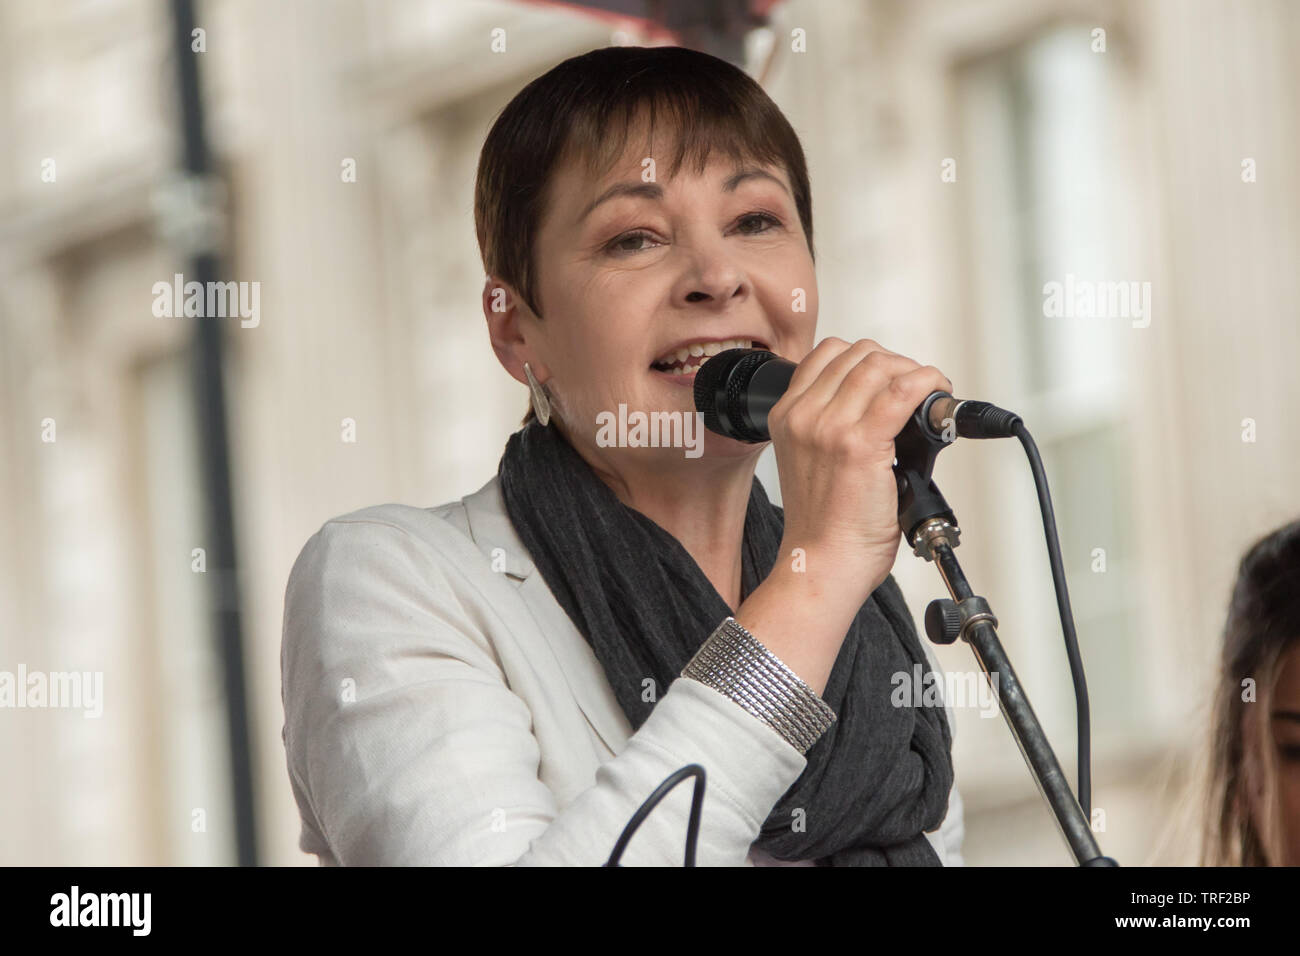 4 June ,2019.. London,UK. Caroline Lucas, Green Party MP addresses the crowd on Whitehall. Tens of Thousands protest in Central London in a National demonstration against US President Donald Trumps State visit to the UK. Protesters rallied in Trafalgar Square before marching down Whitehall to Downing Street, where Trump was meeting UK Prime Minister Theresa May. David Rowe/Alamy Live News. Stock Photo